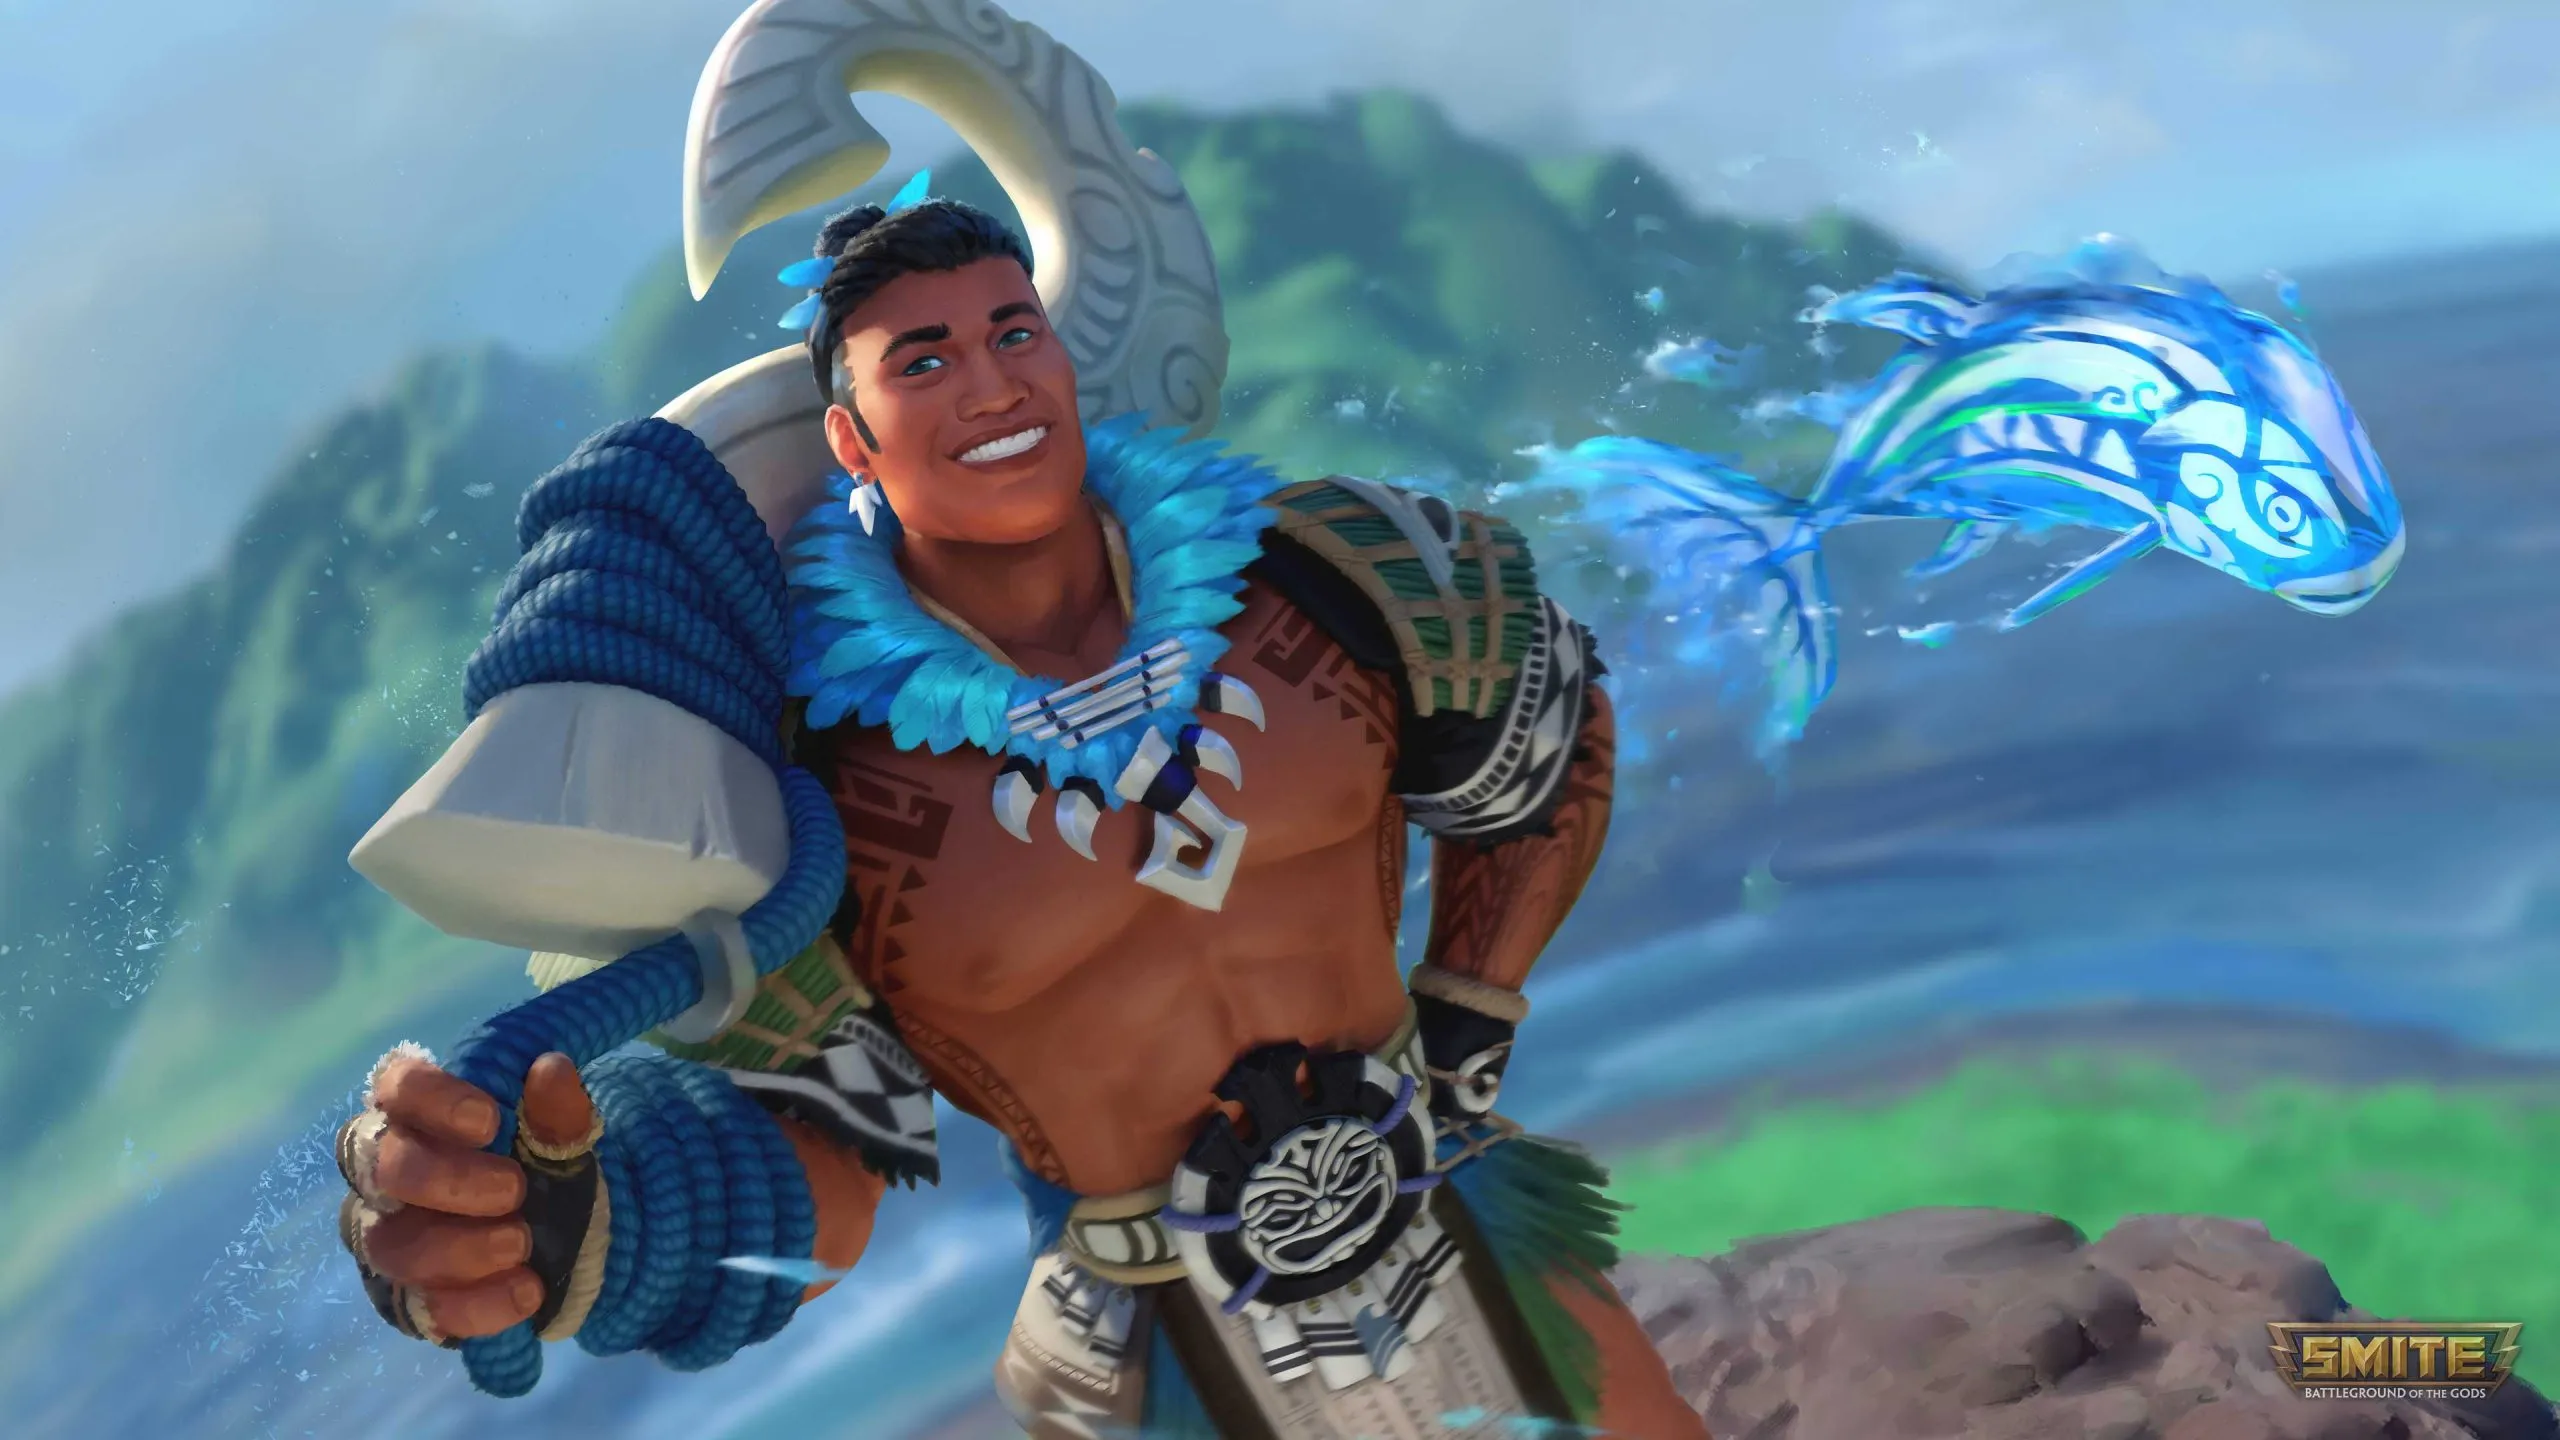 Smite guardian Maui surfaces today